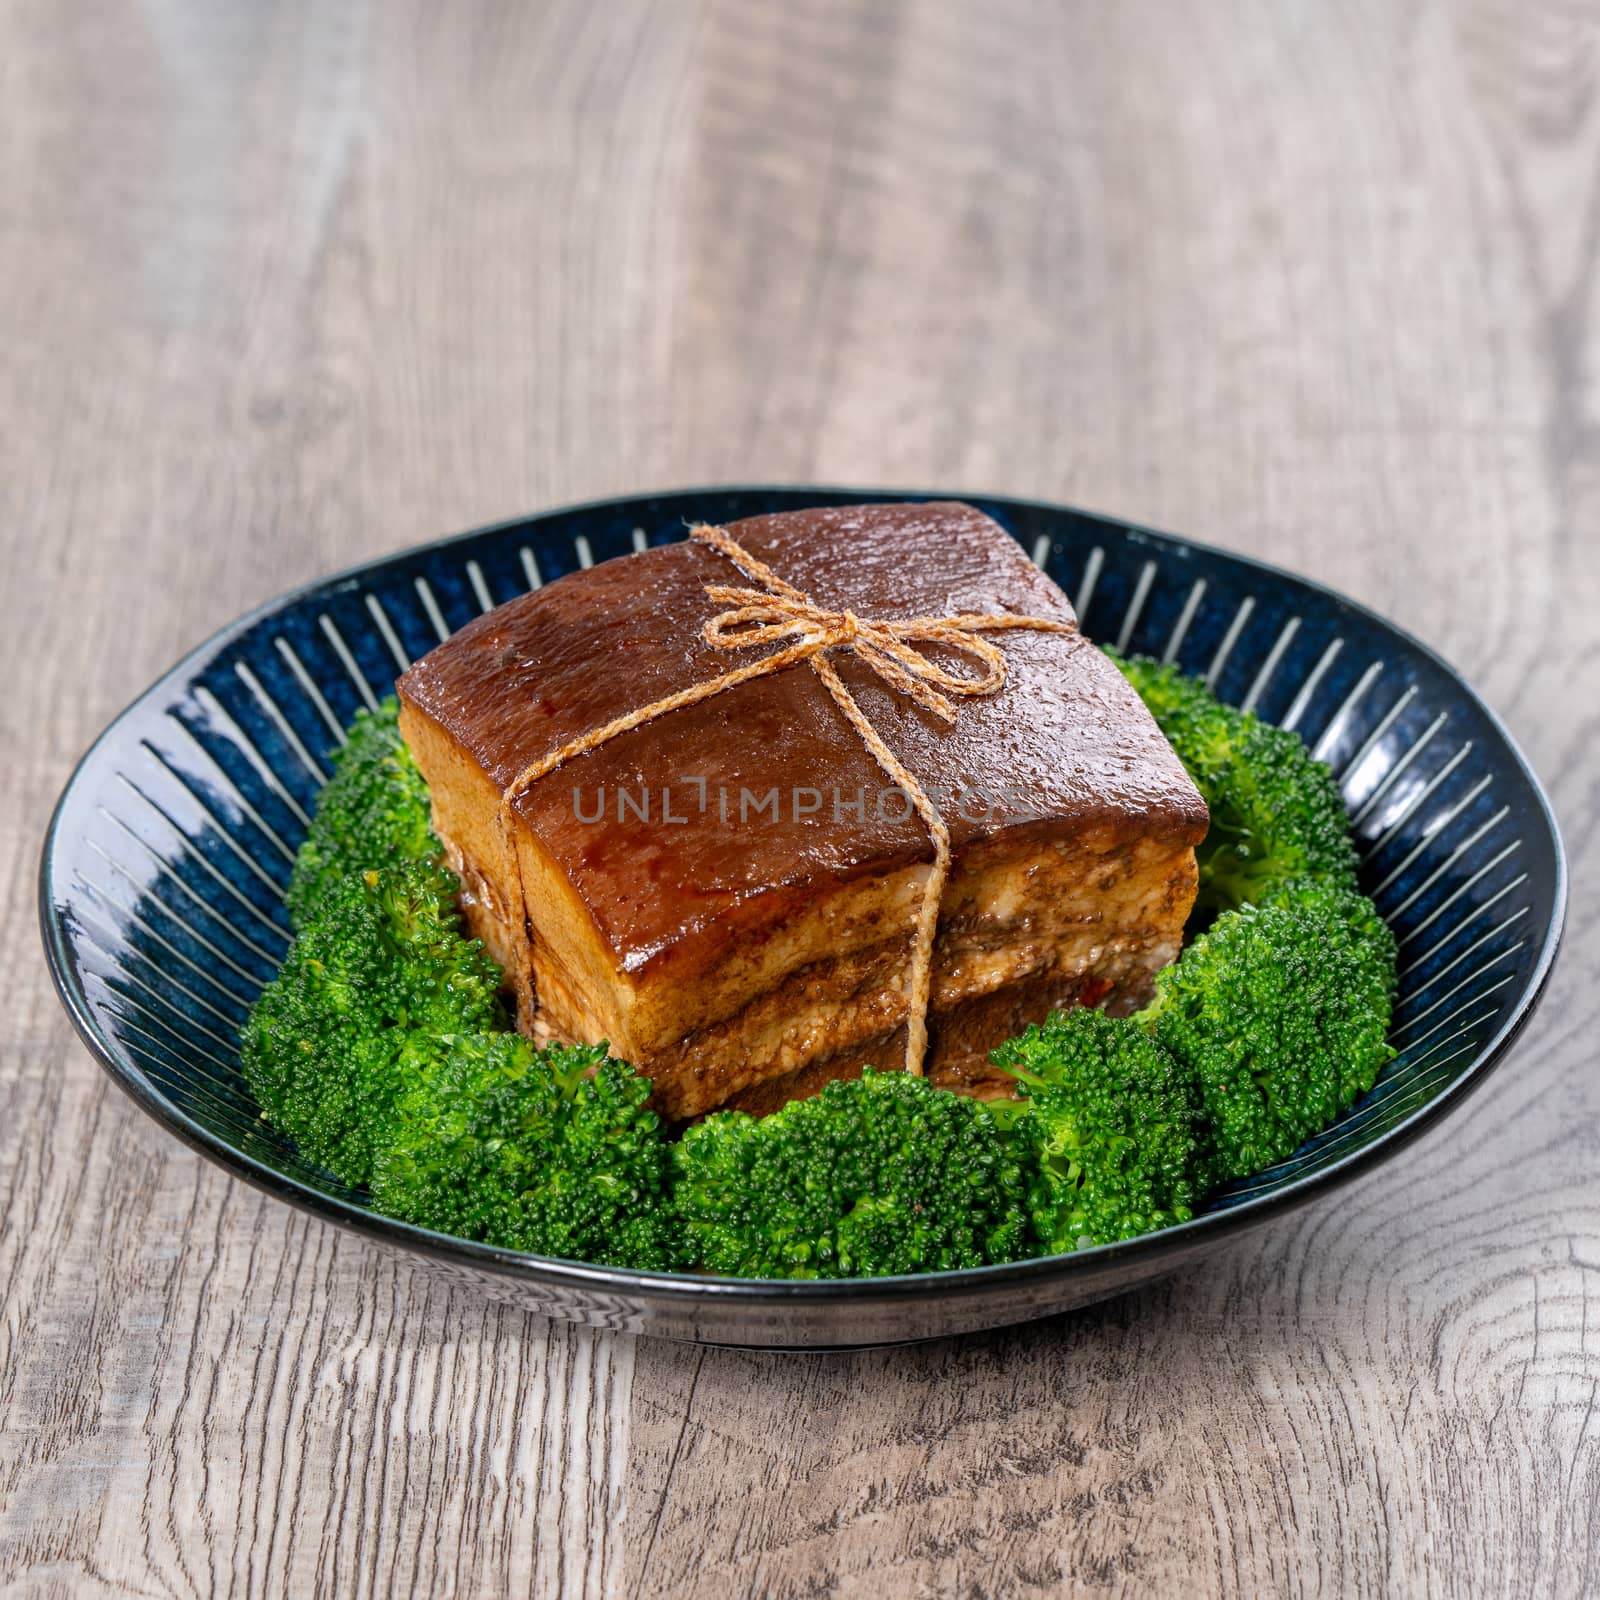 Dong Po Rou (Dongpo pork meat) in a beautiful blue plate with gr by ROMIXIMAGE